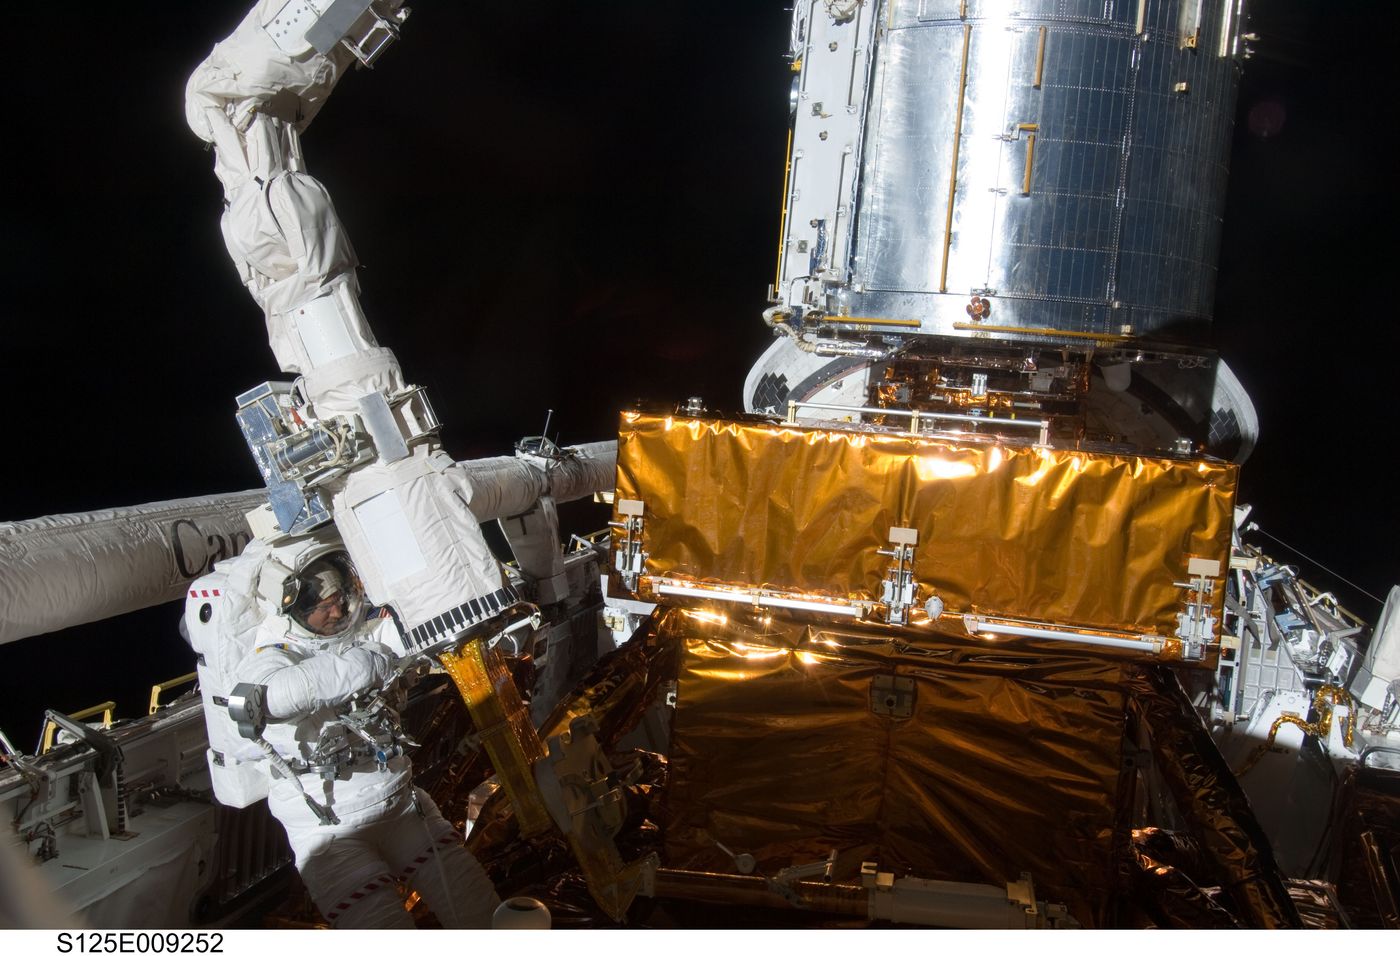 Image of Astronaut Michael Good making repairs on the Hubble Space Telescope in 2009